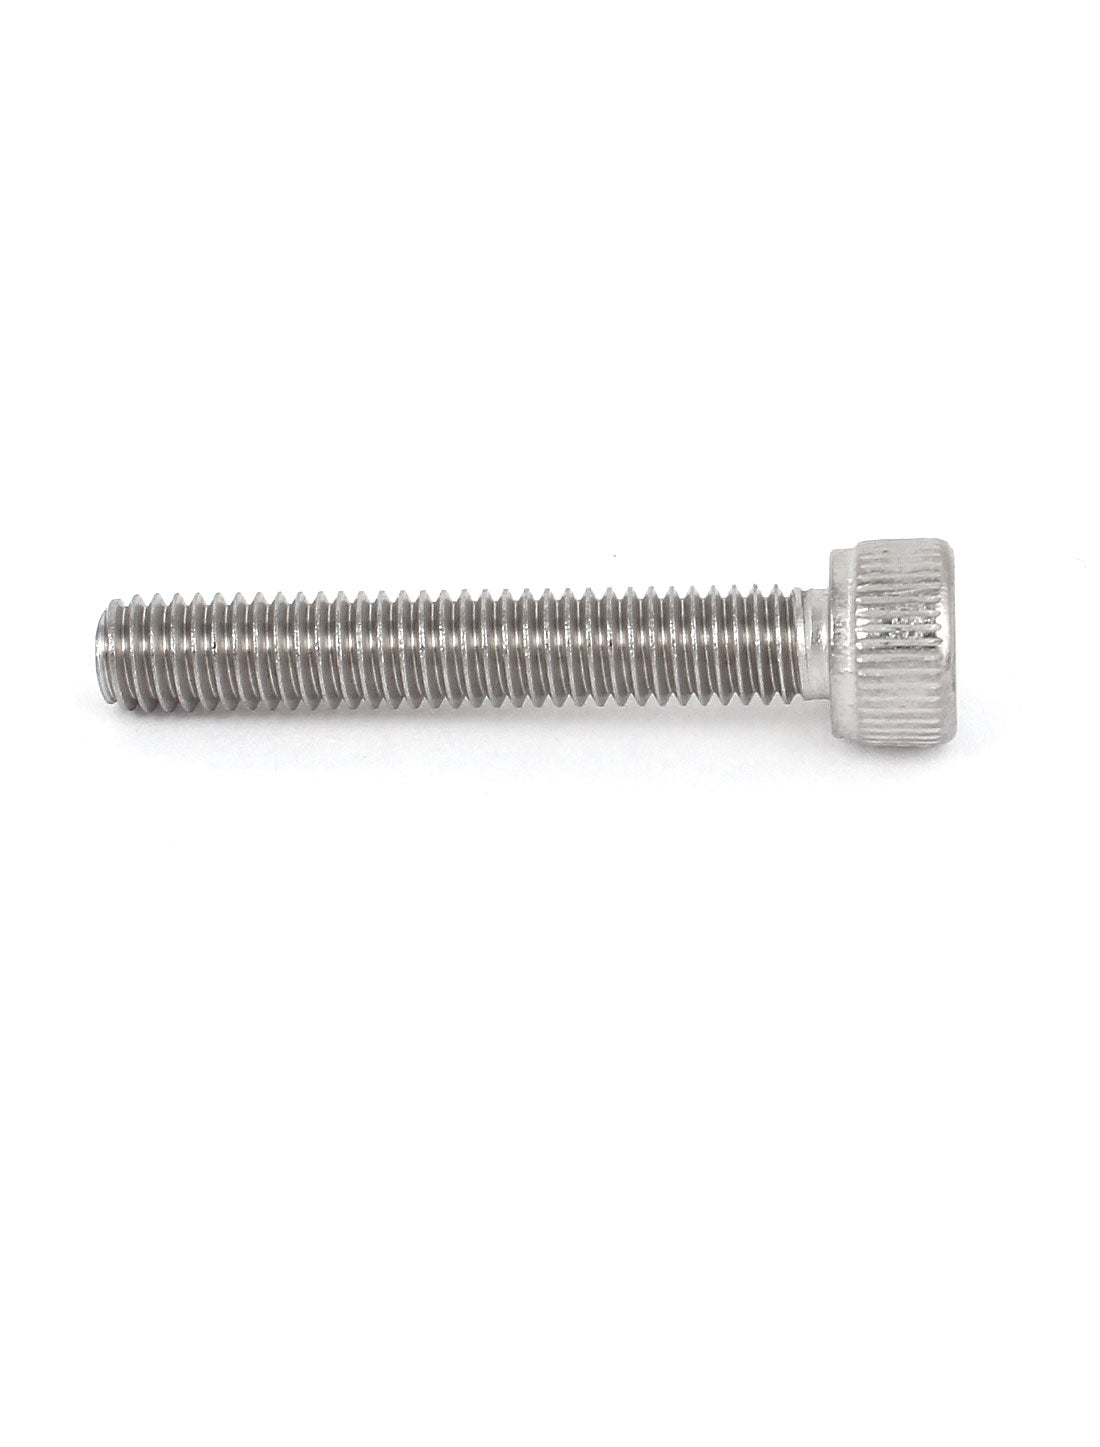 uxcell Uxcell 1mm Pitch M6x35mm Stainless Steel Hex Socket Head Cap Machine Screws Bolts 20pcs